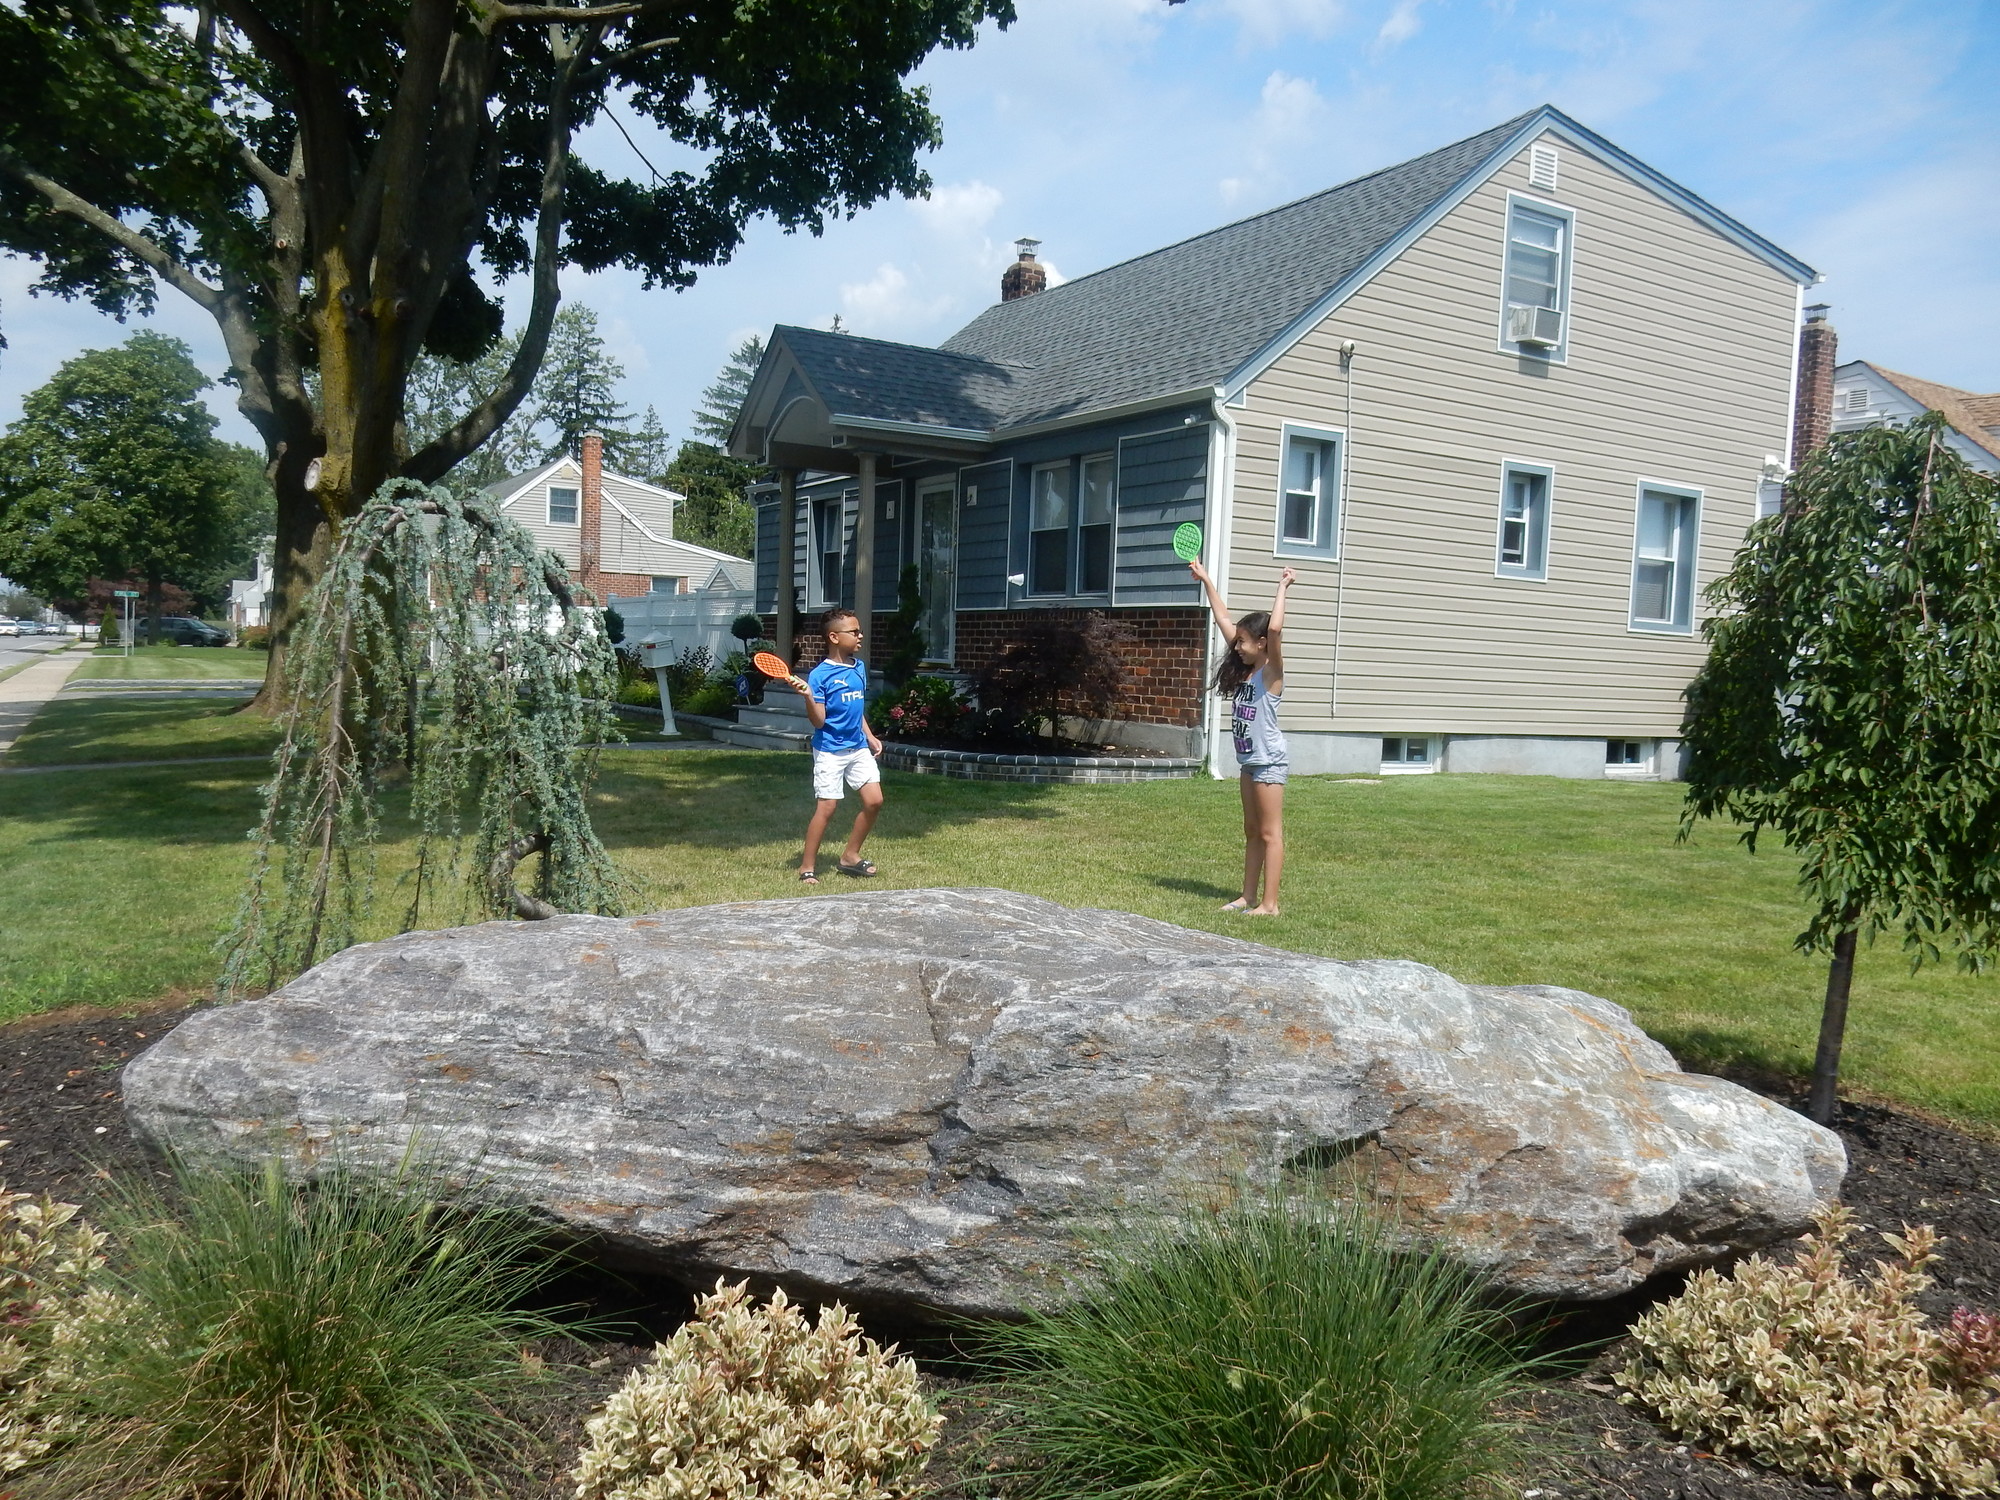 Twins Anthony and Angie Sissons, 9, played behind a 7,000-pound hunk of granite that their parents added to their property, at the corner of Prospect Avenue and Second Street, after a car drove into their home Memorial Day weekend.